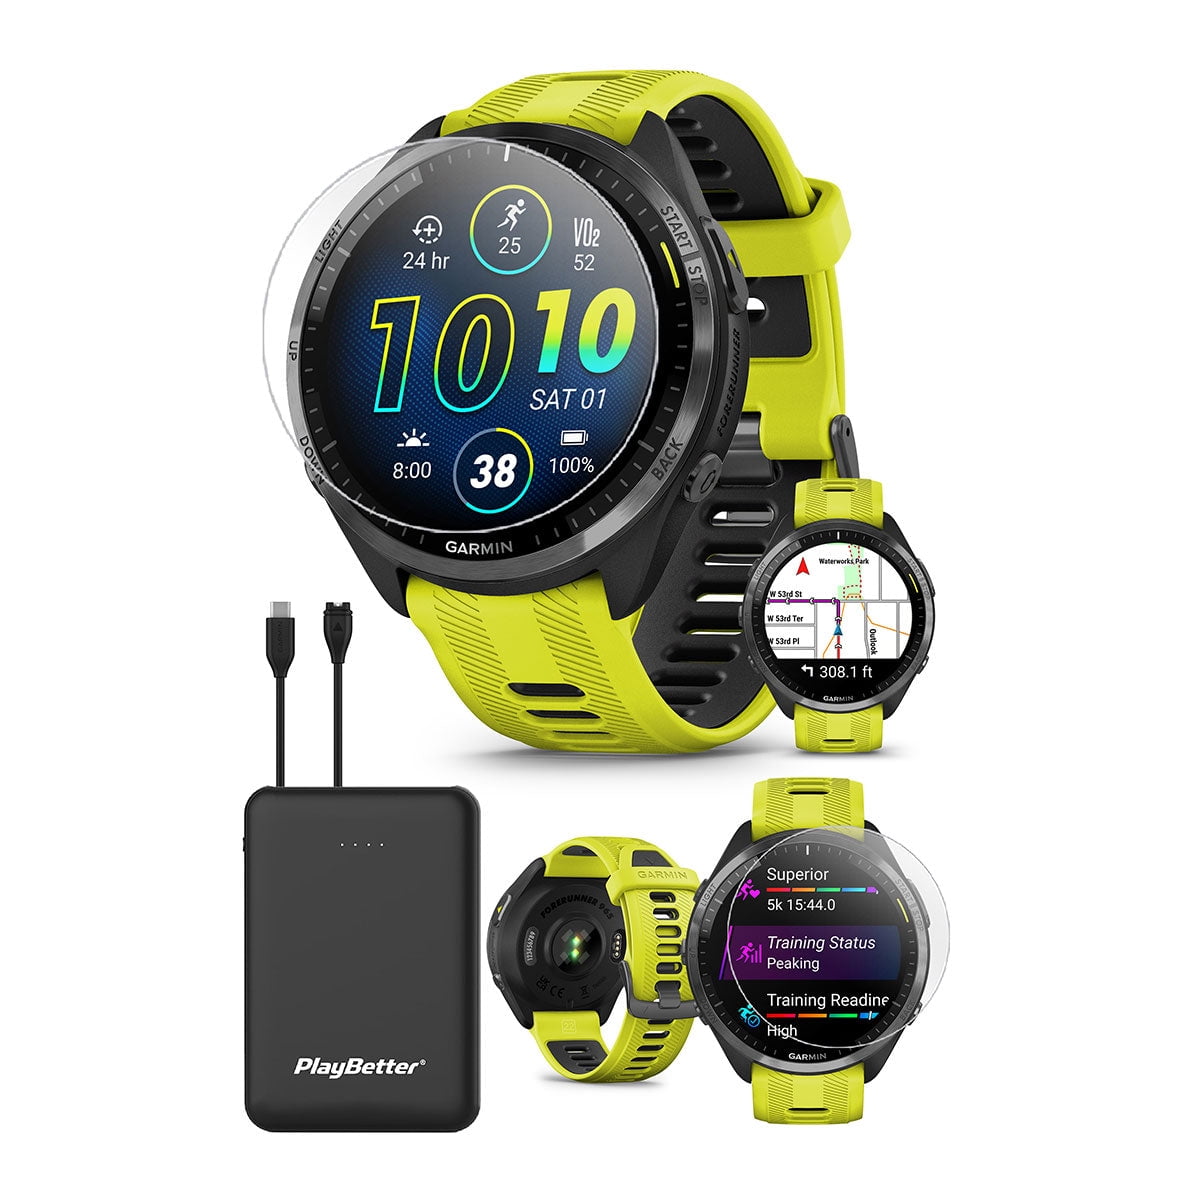 Garmin Forerunner 965 (Amp Yellow/Black) Premium Running & Triathlon GPS Smartwatch | Bundle with PlayBetter Screen Protectors & Portable Charger - image 1 of 7